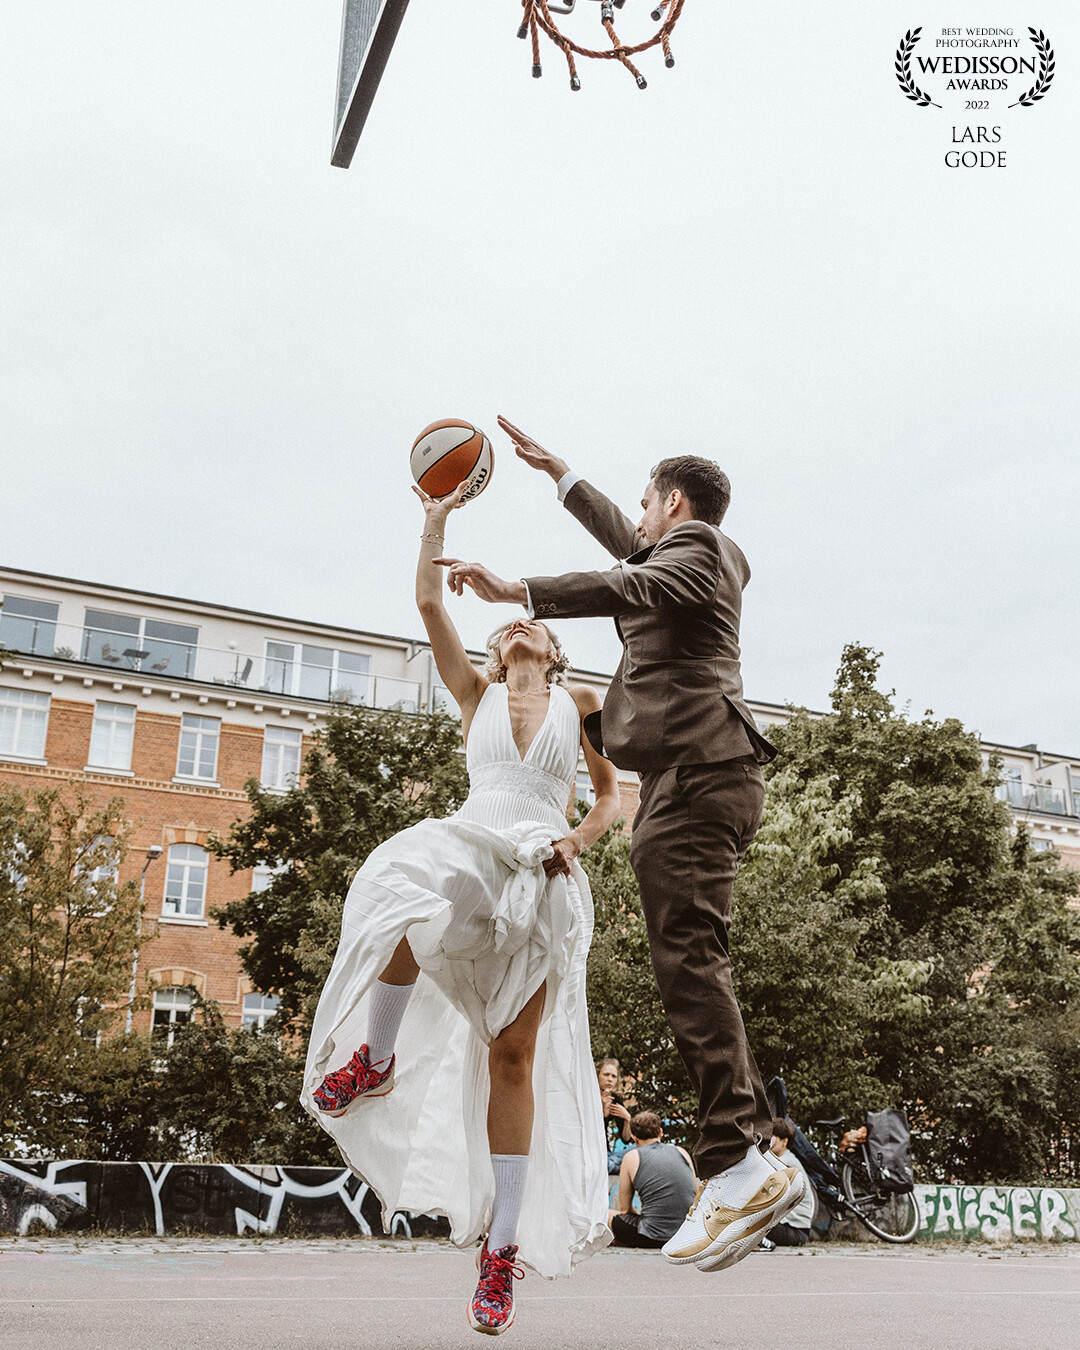 Bride and groom both work in the basketball business. She, responsible for personnel selection, got his application on the table and..... refused. However, when her boss advocated a job interview, the later groom convinced - not only in the job, but also the bride. Stories that life writes - what could be more obvious than a shoot on the basketball court.